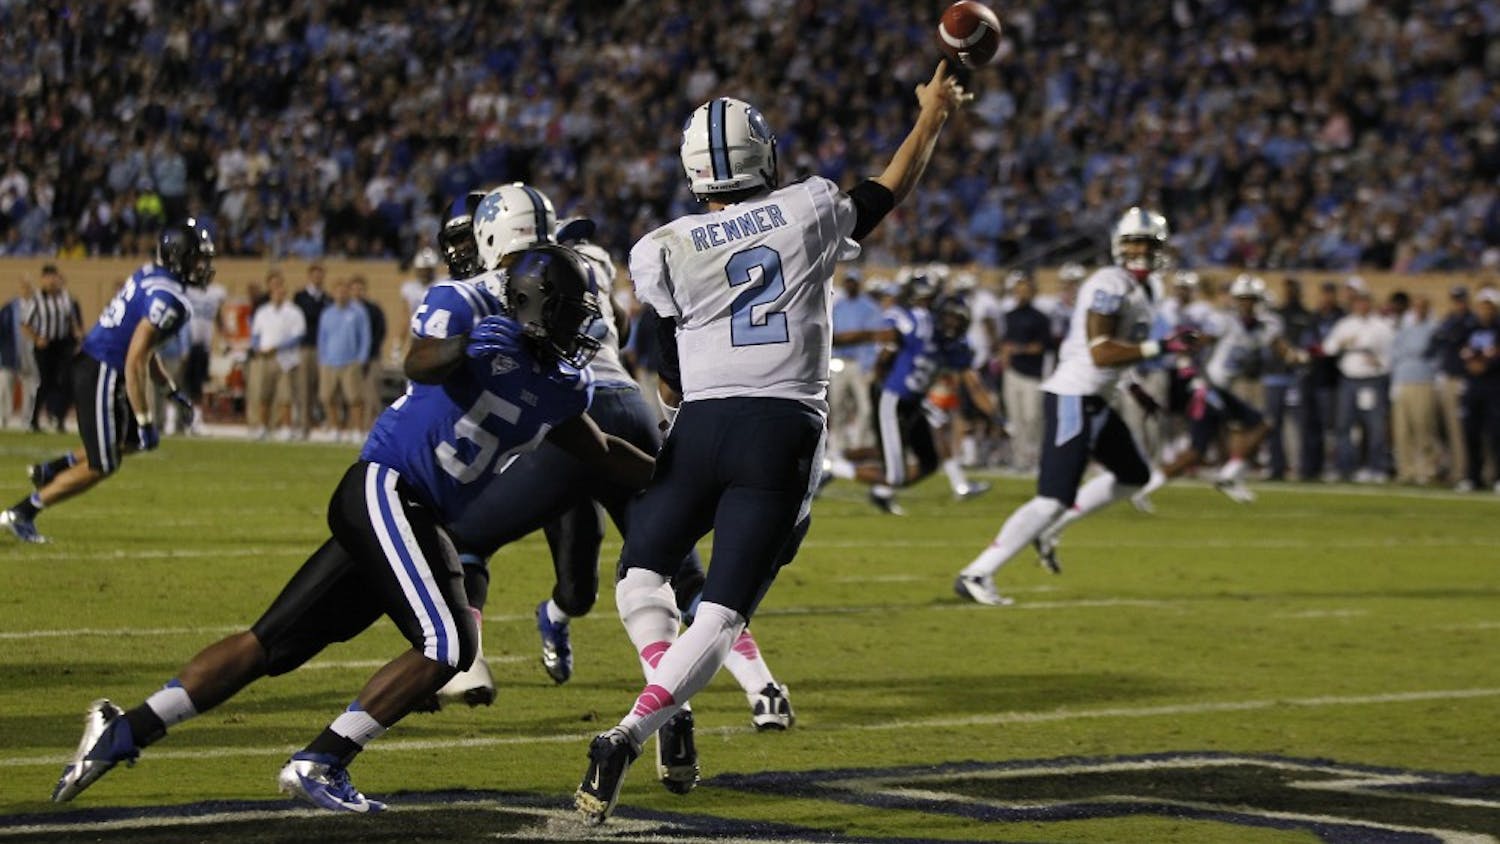 North Carolina quarterback Bryn Renner (2) gets rid of the ball from the end zone as Duke linebacker C.J. France (54) approaches on Saturday, October 20, 2012 at Wallace Wade Stadium in Durham, North Carolina. (Chuck Liddy/Raleigh News &amp; Observer/MCT)